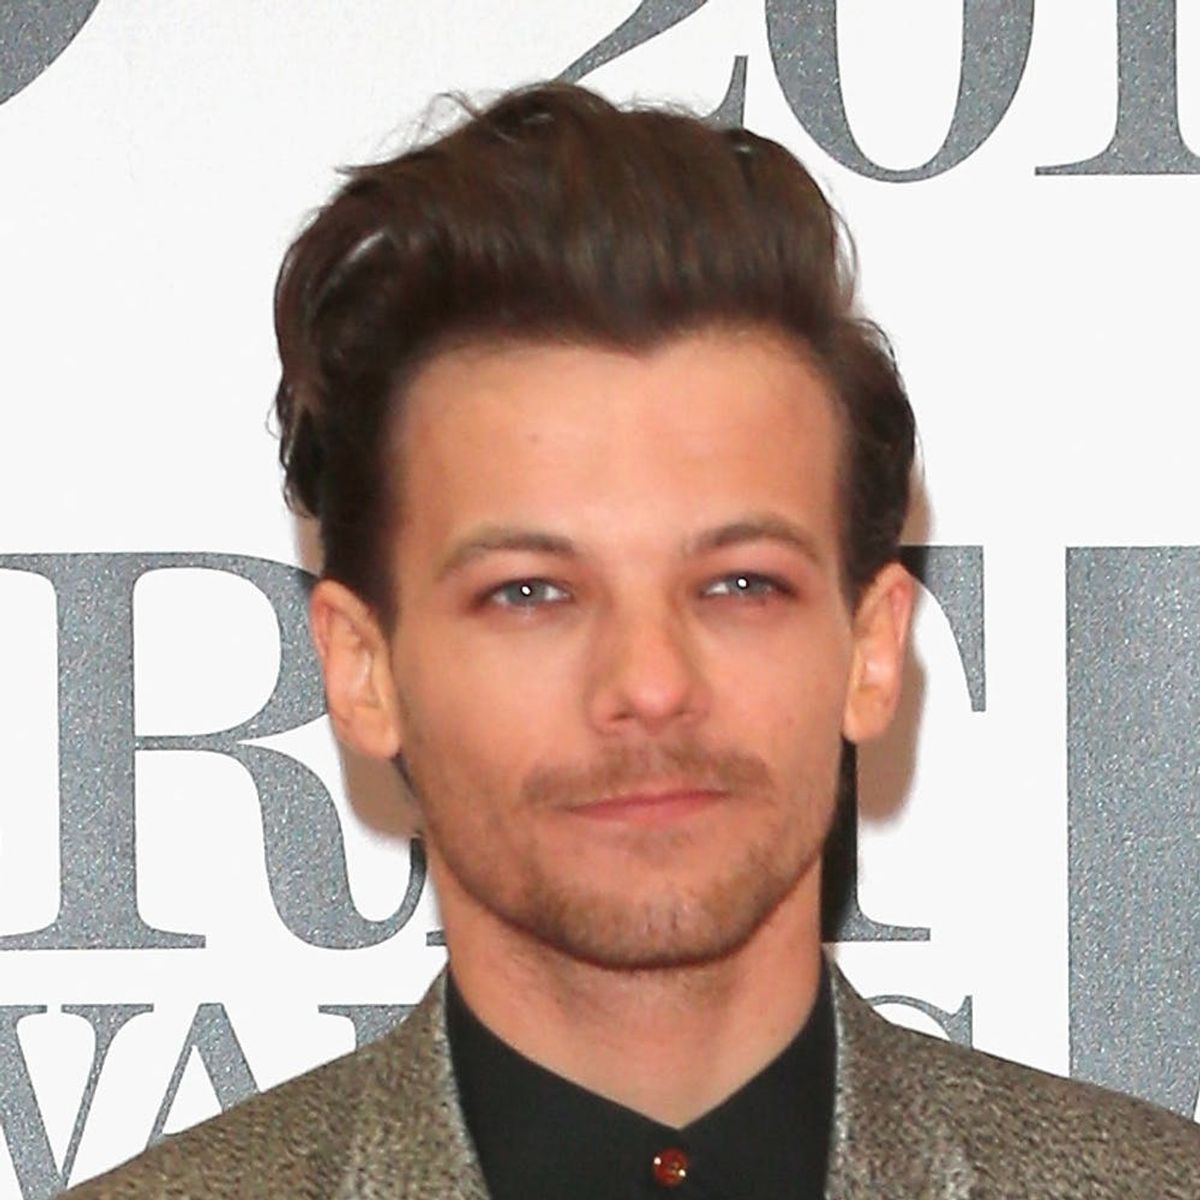 Louis Tomlinson’s Sweet Pic With Baby Son Freddie Will Make You a Fangirl